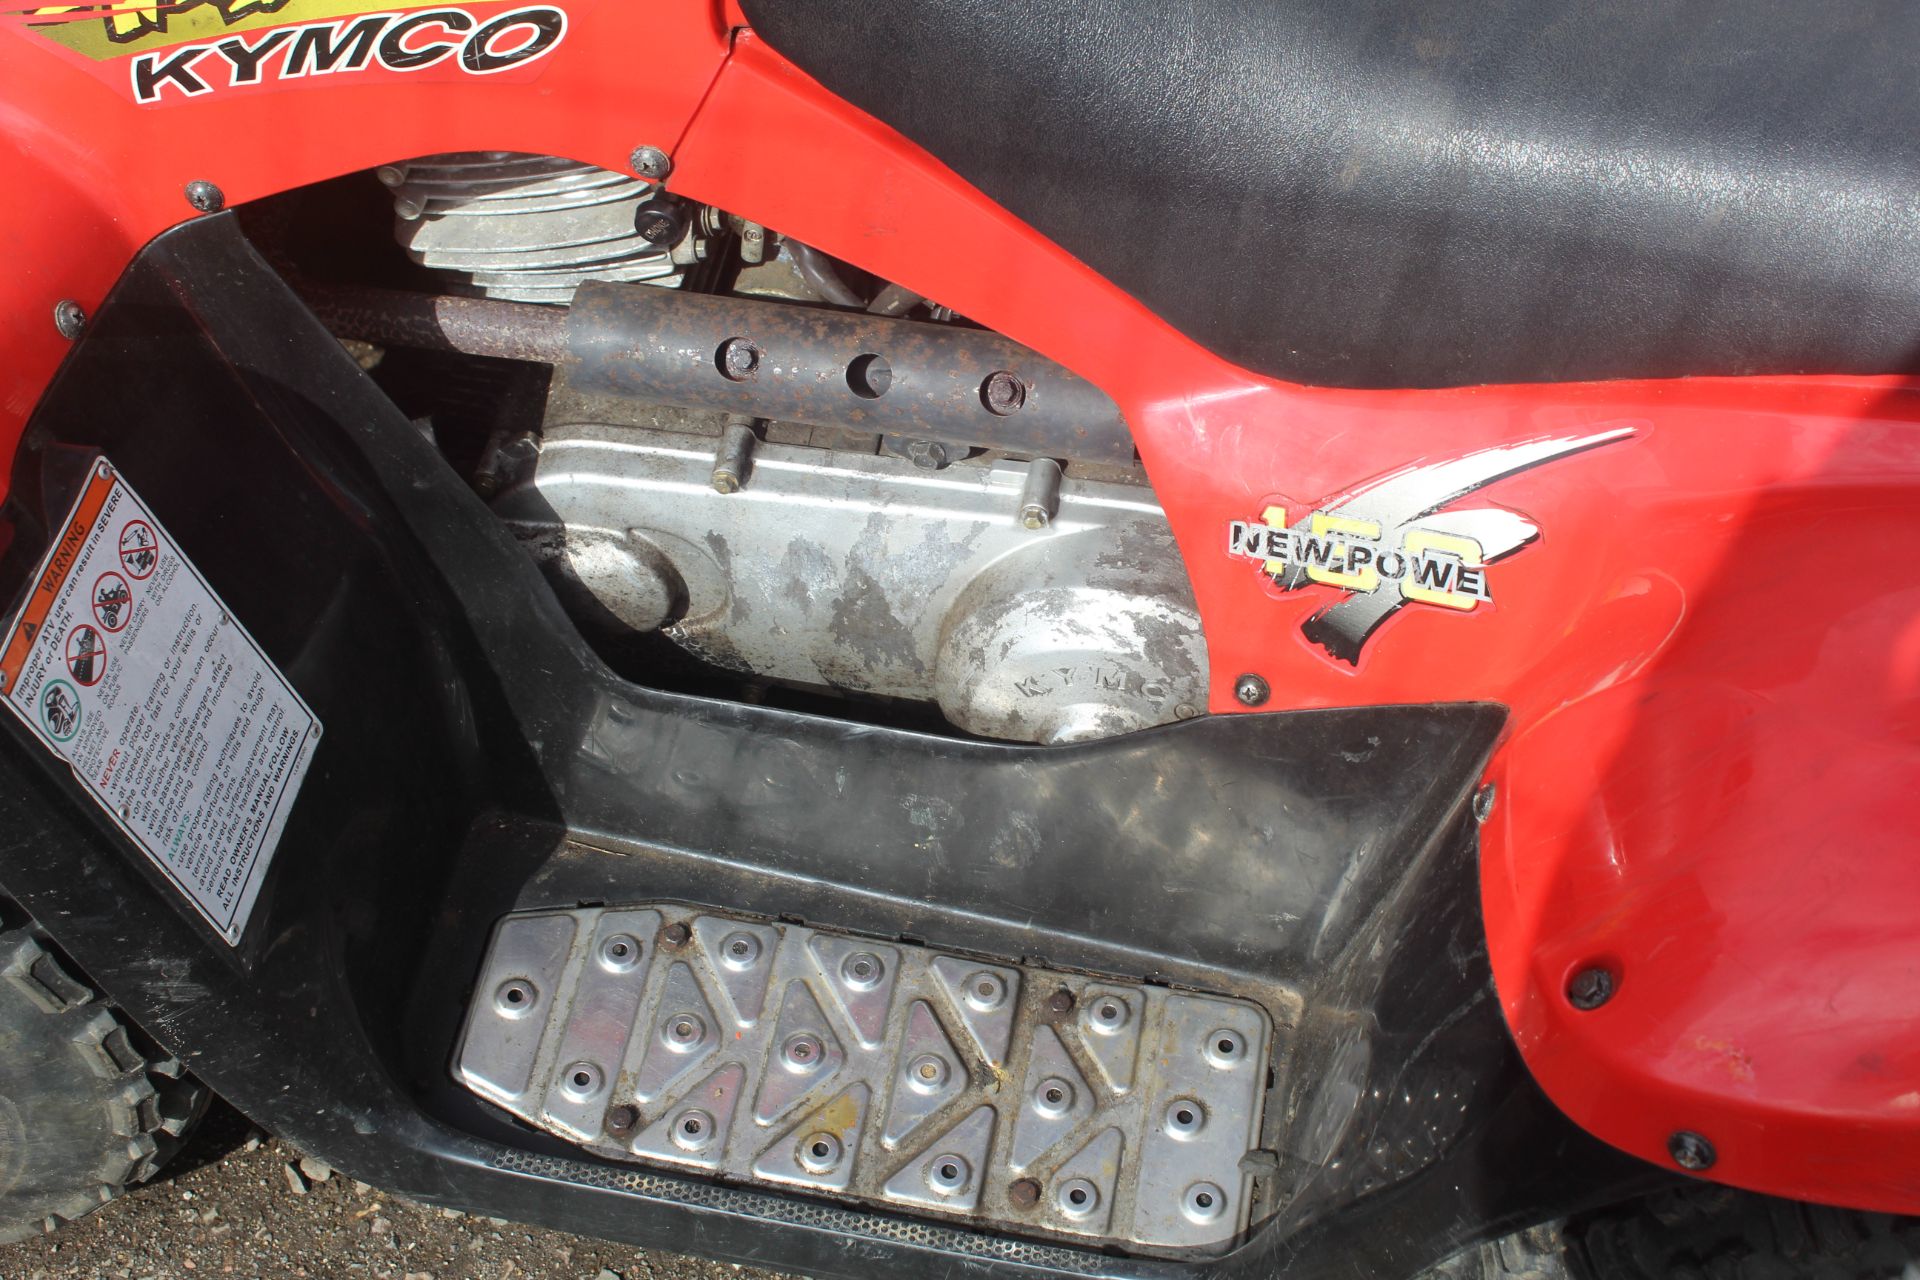 Kymco MX'er 150cc off road ATV. 2004. owned from new. Key, Manual held. - Image 16 of 18